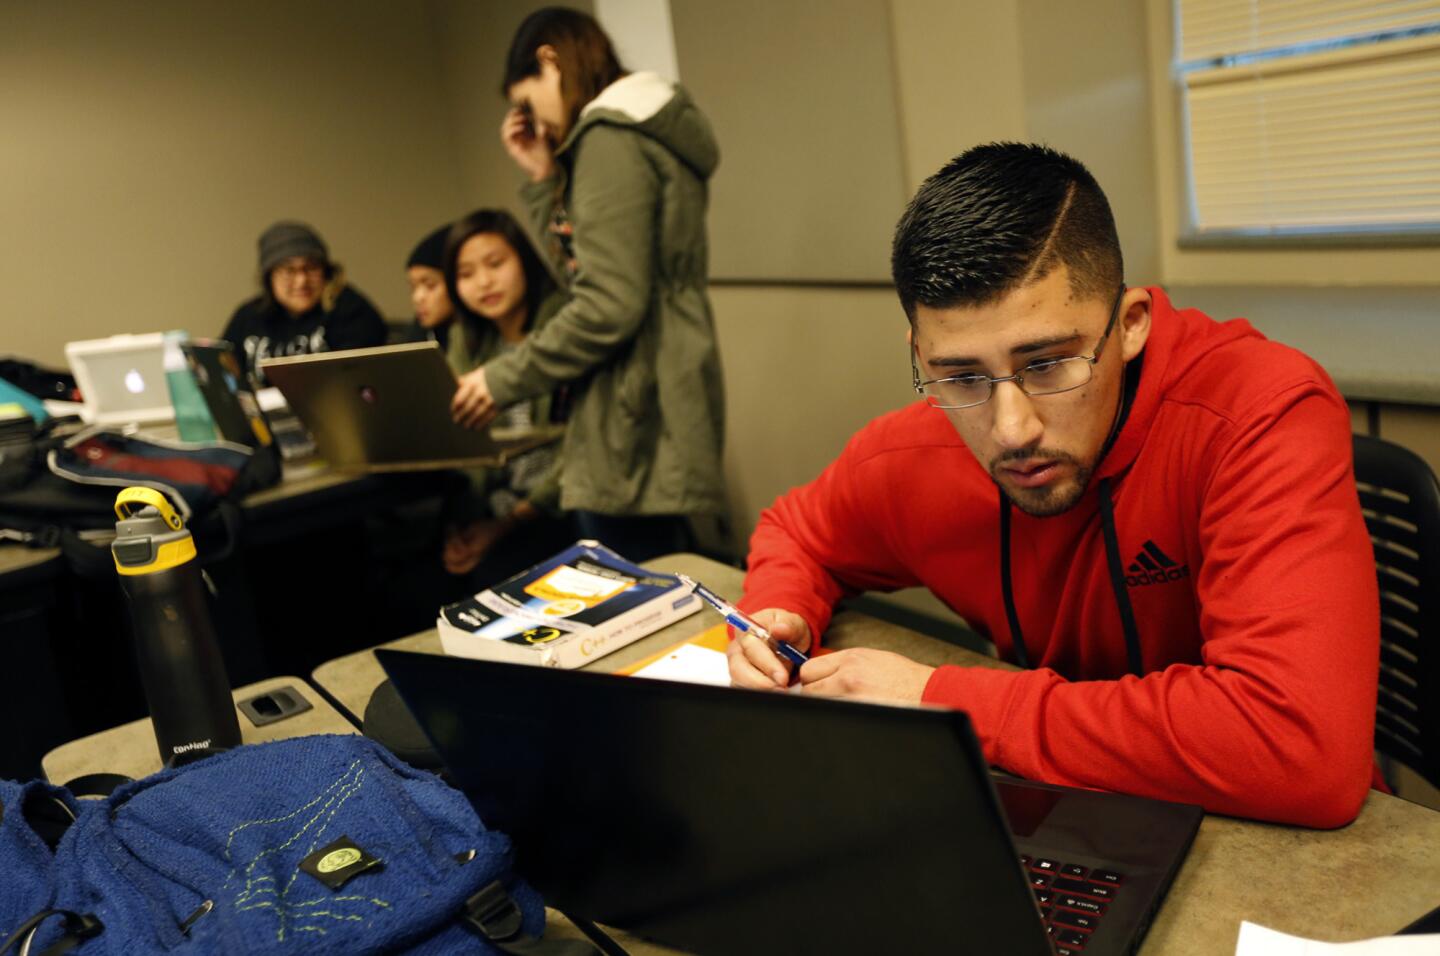 After classes, Dario Molina, 22, works on assignments during a study hall at Hartnell College Alisal Campus in Salinas, Calif.